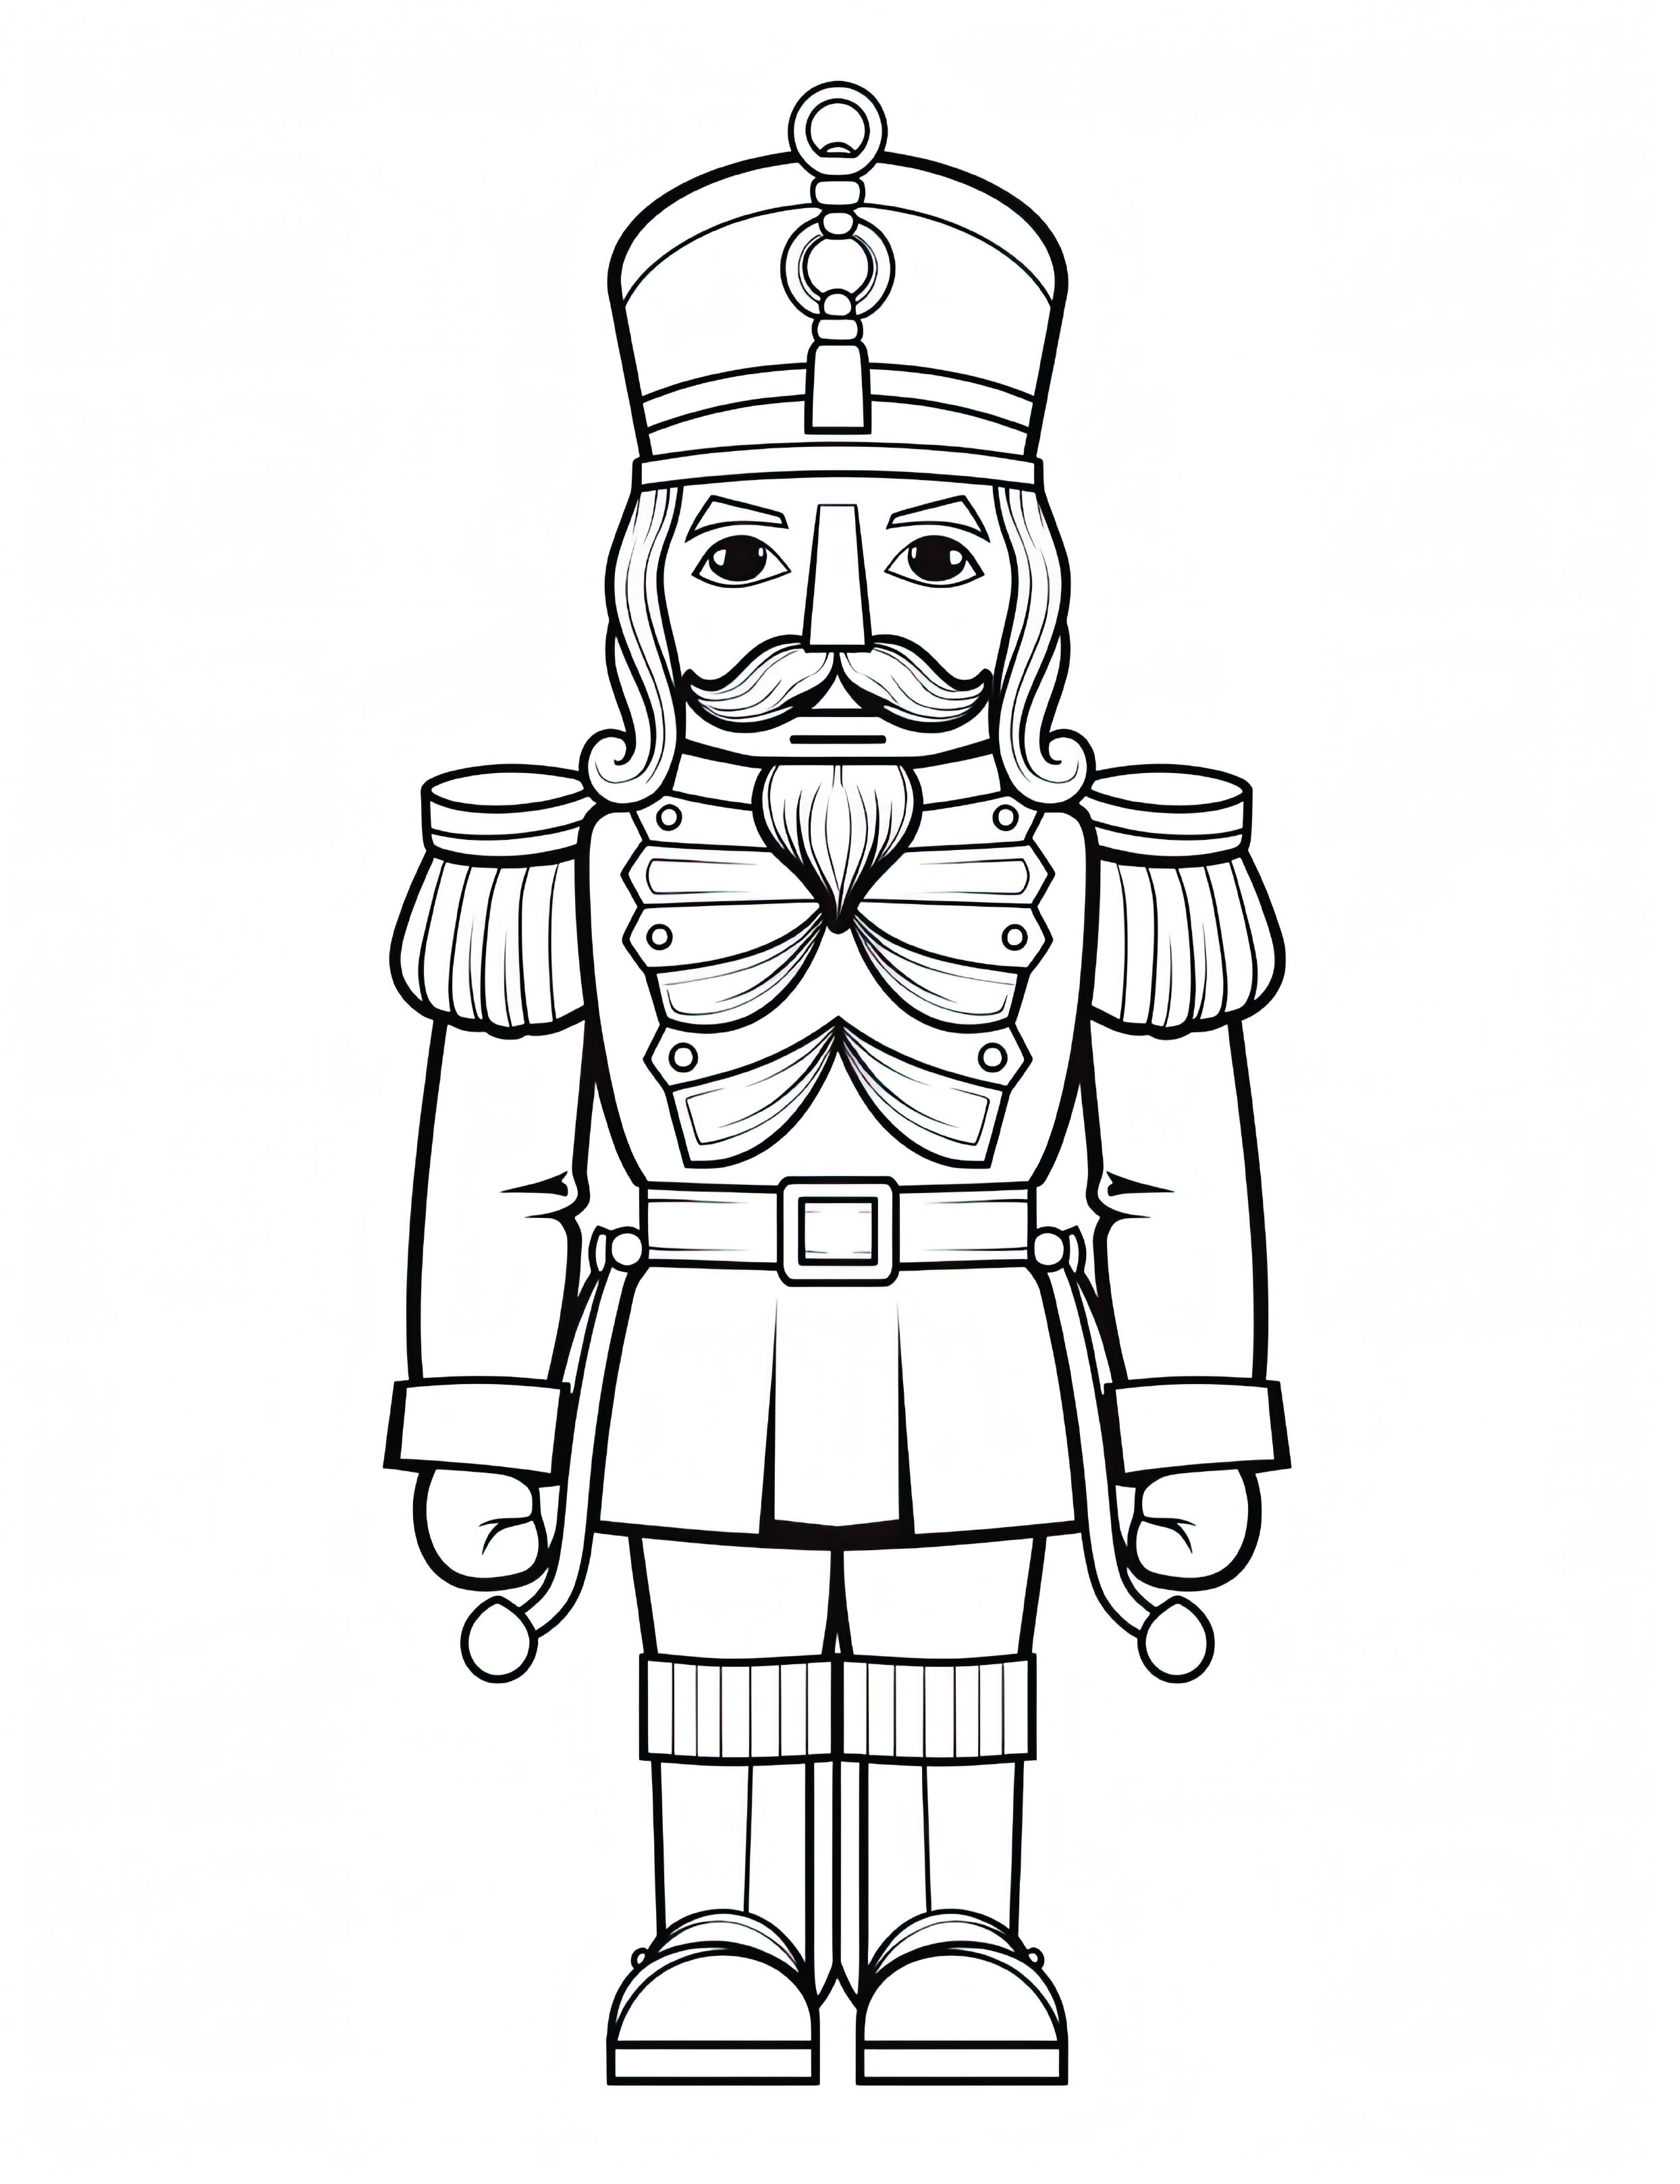 Wooden Sentinel Nutcracker Coloring Page